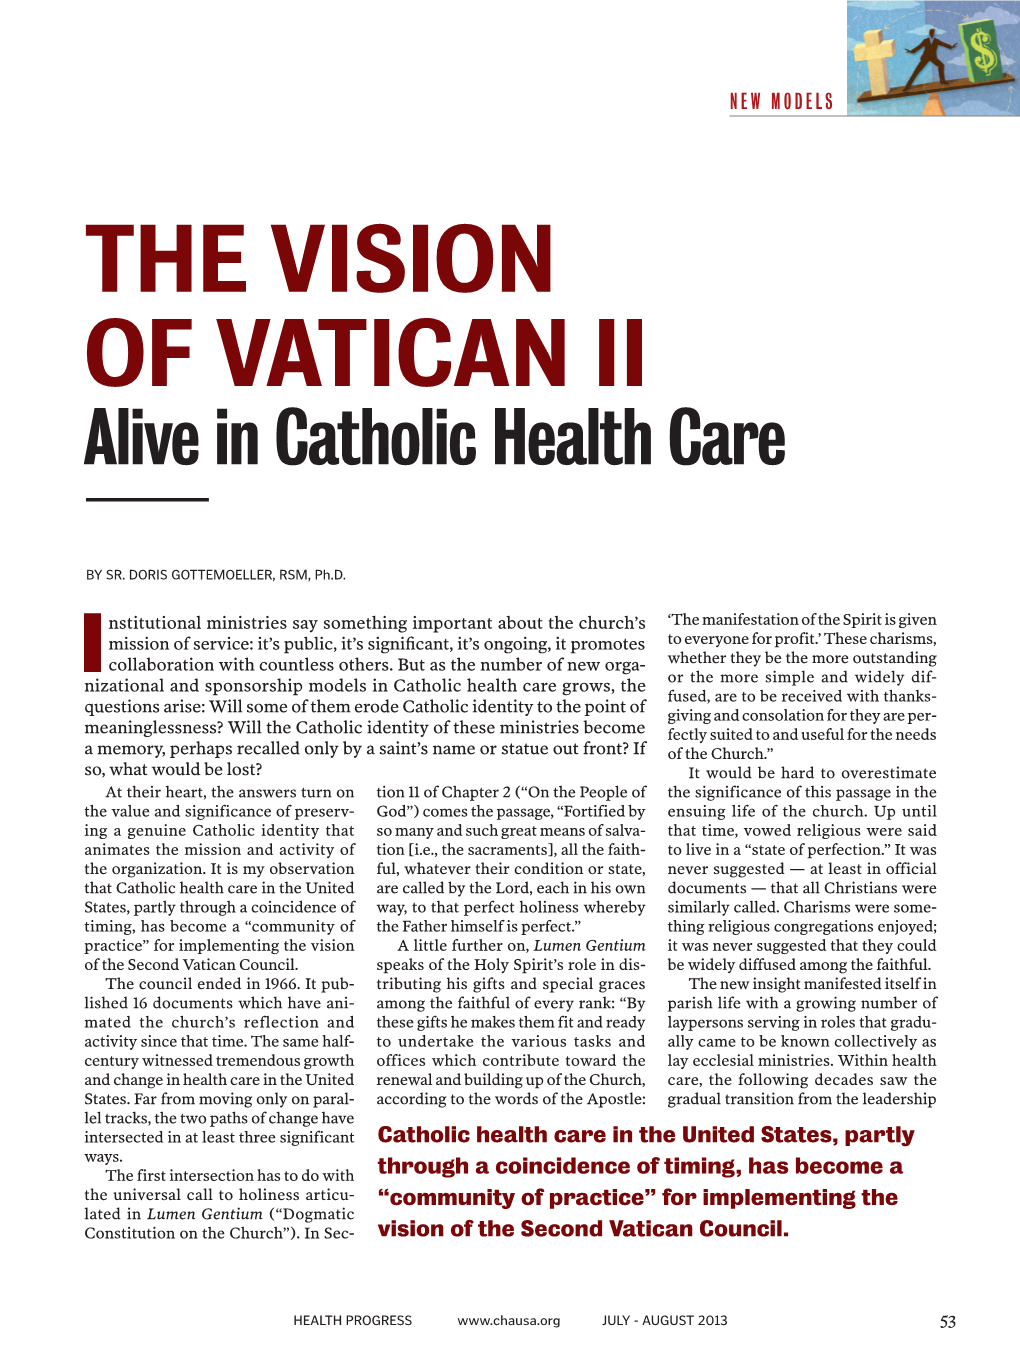 The Vision of Vatican II-Alive in Catholic Health Care